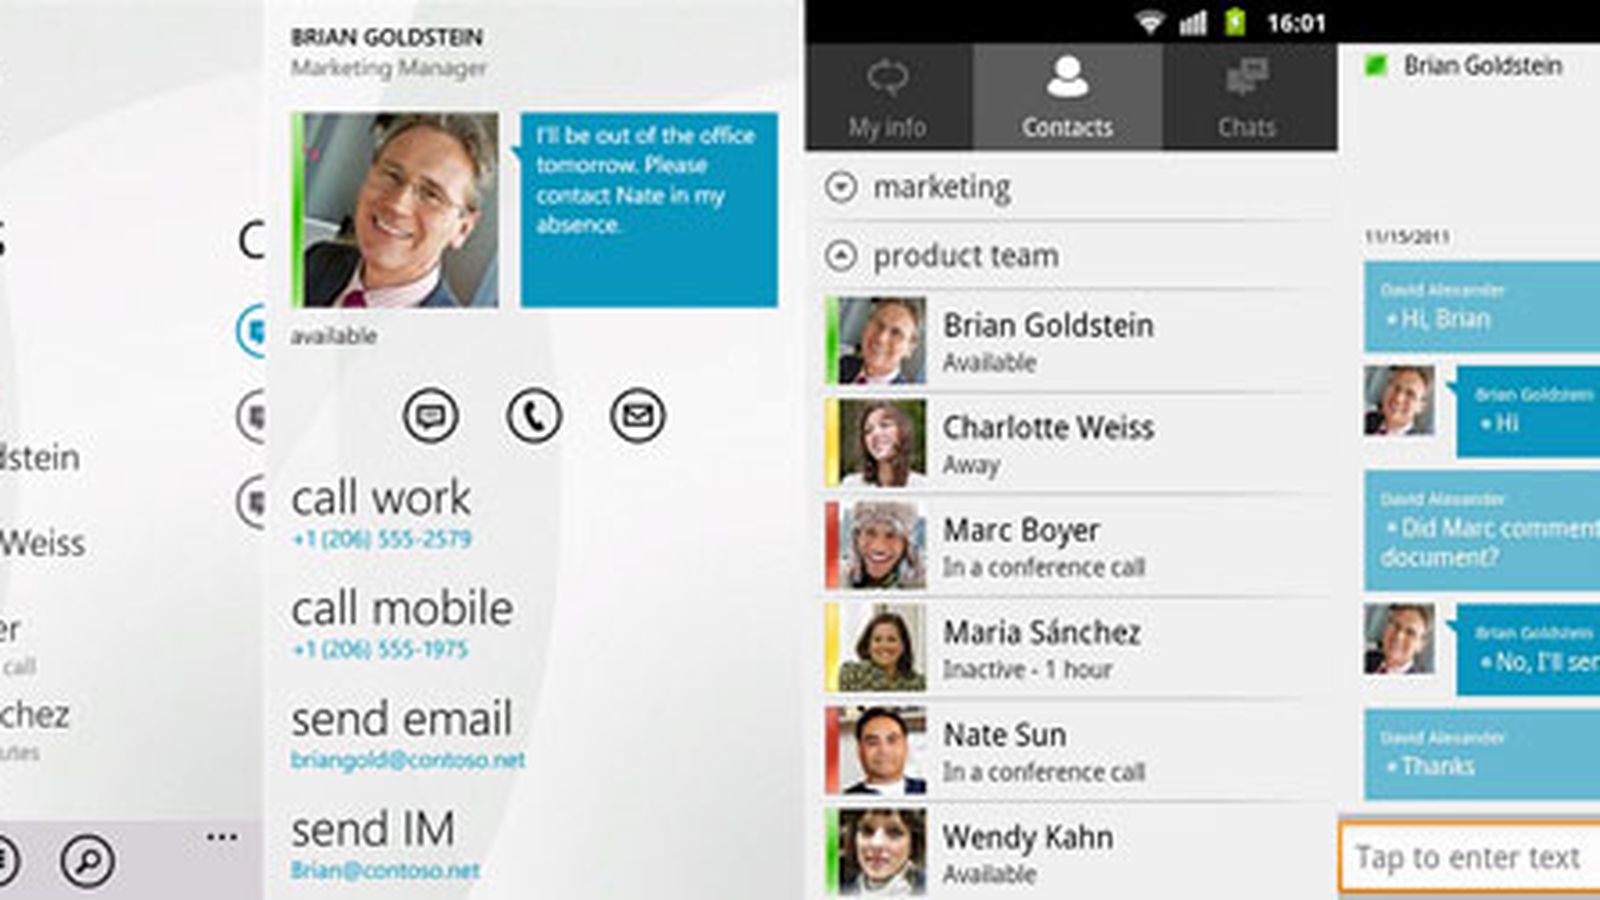 Download microsoft lync client for android windows 7